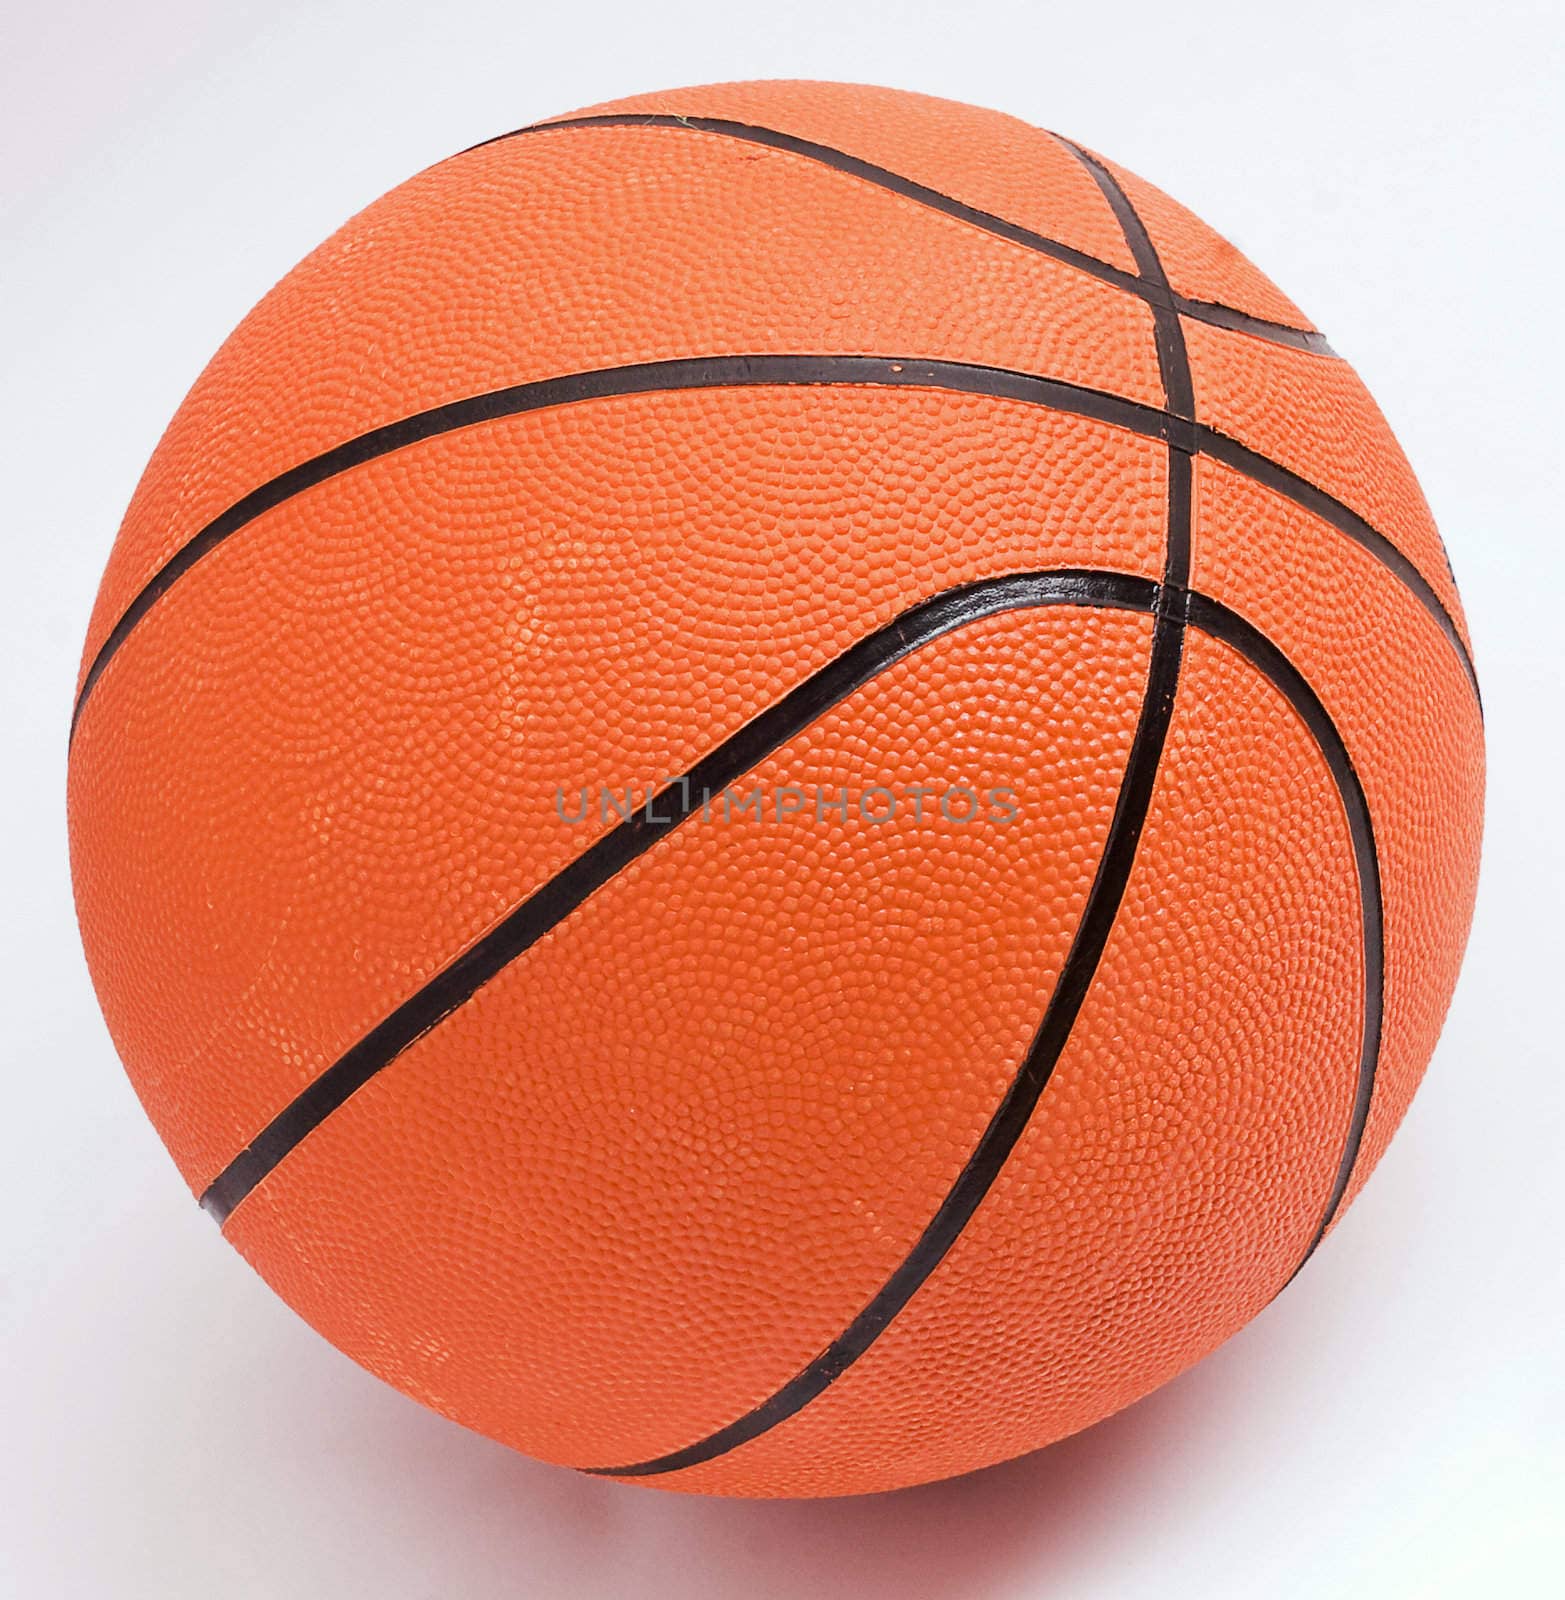 Isolated shot of basketball on a white background